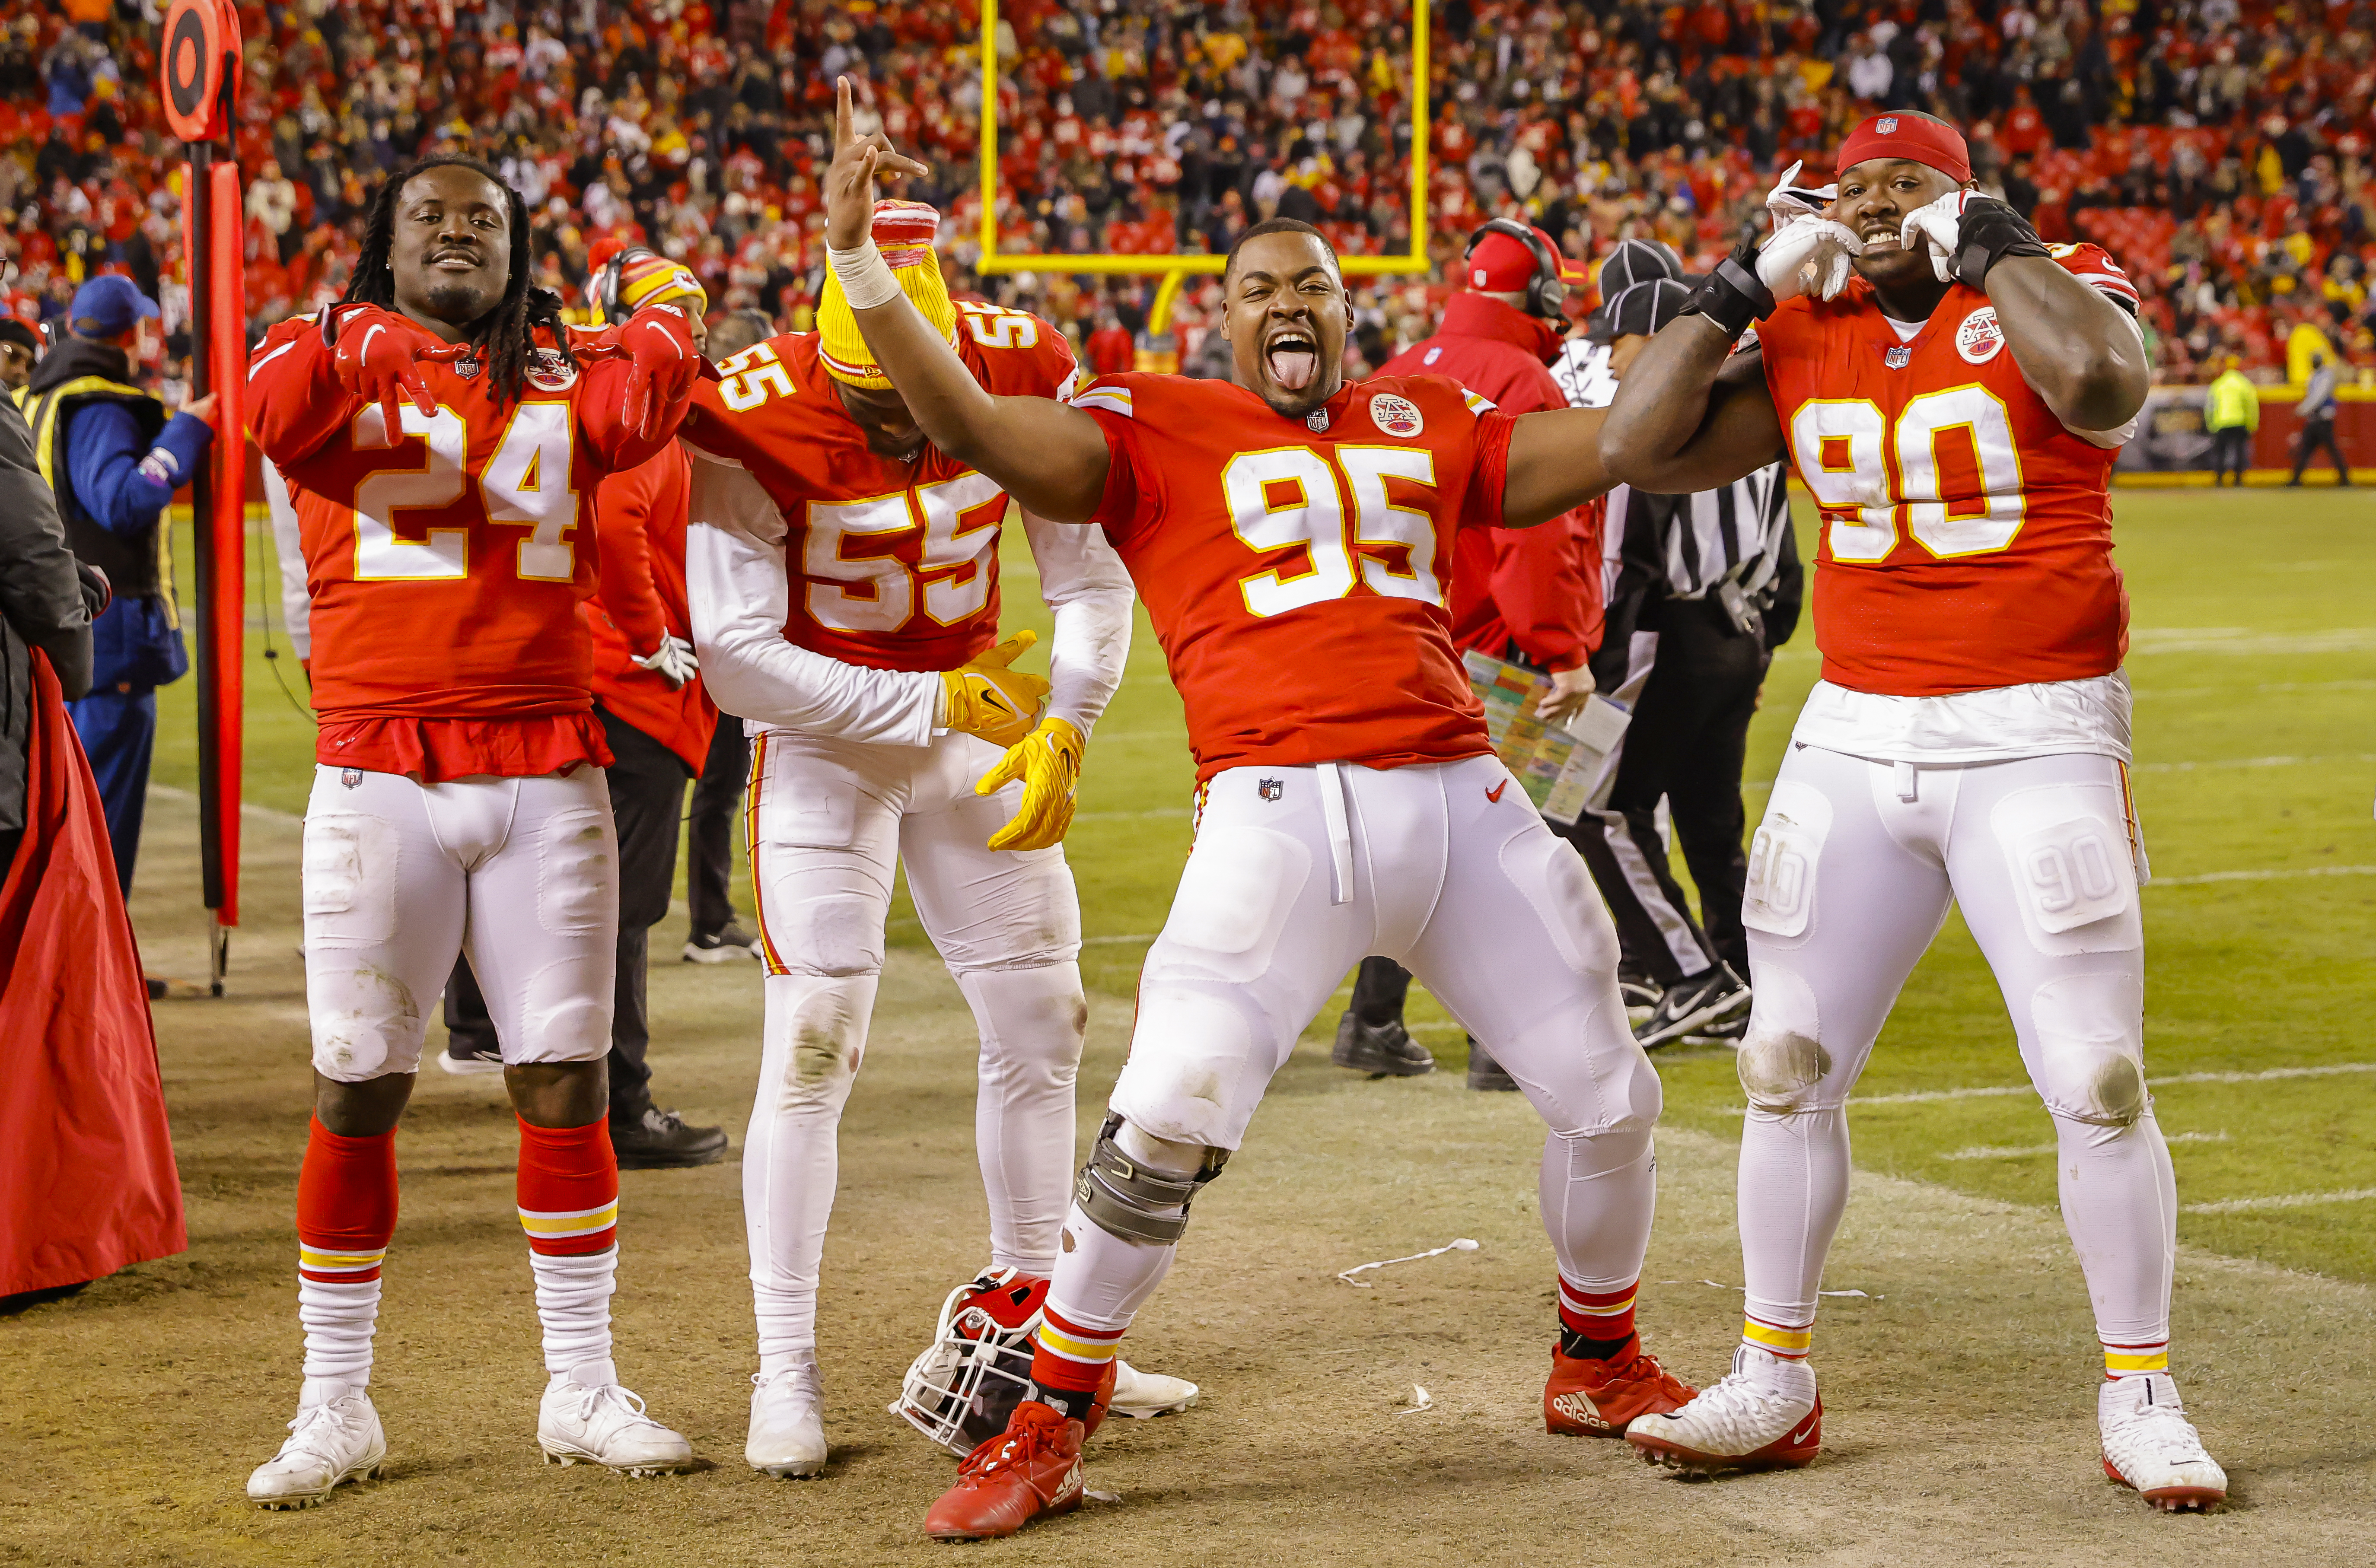 Melvin Ingram #24 of the Kansas City Chiefs, Chris Jones #95 of the Kansas City Chiefs and Jarran Reed #90 of the Kansas City Chiefs react to the 42-21 victory over the Pittsburgh Steelers during the AFC Wild Card Playoff game at Arrowhead Stadium on January 16, 2022 in Kansas City, Missouri.